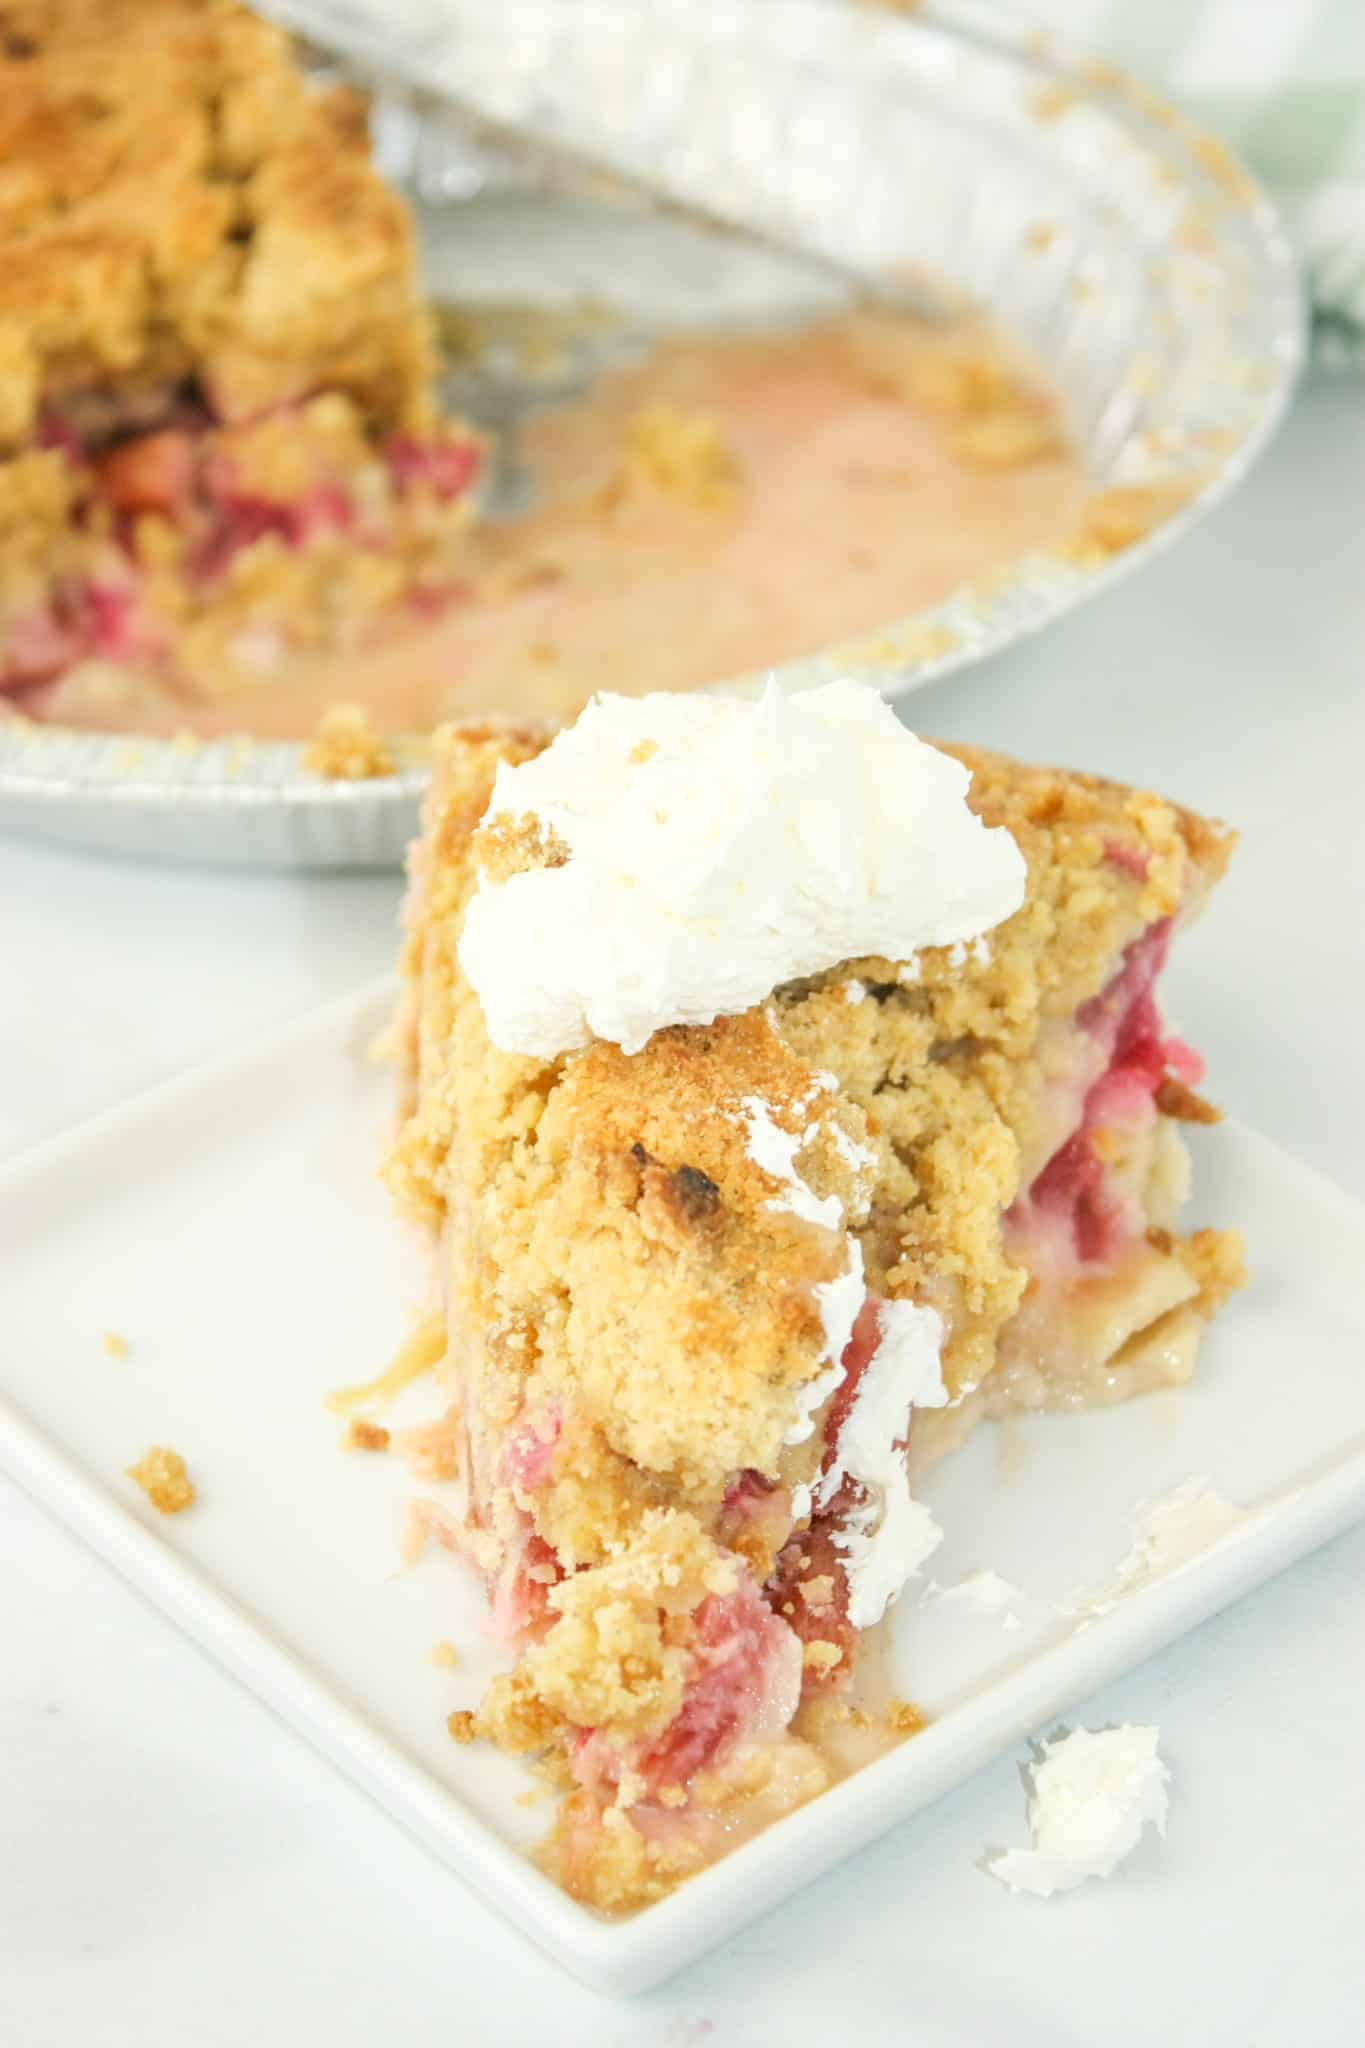 Rhubarb Crumble Pie is a blend of sweet and slightly tart flavouring.  I look forward to this tasty dessert every year when this spring vegetable is harvested from the garden.